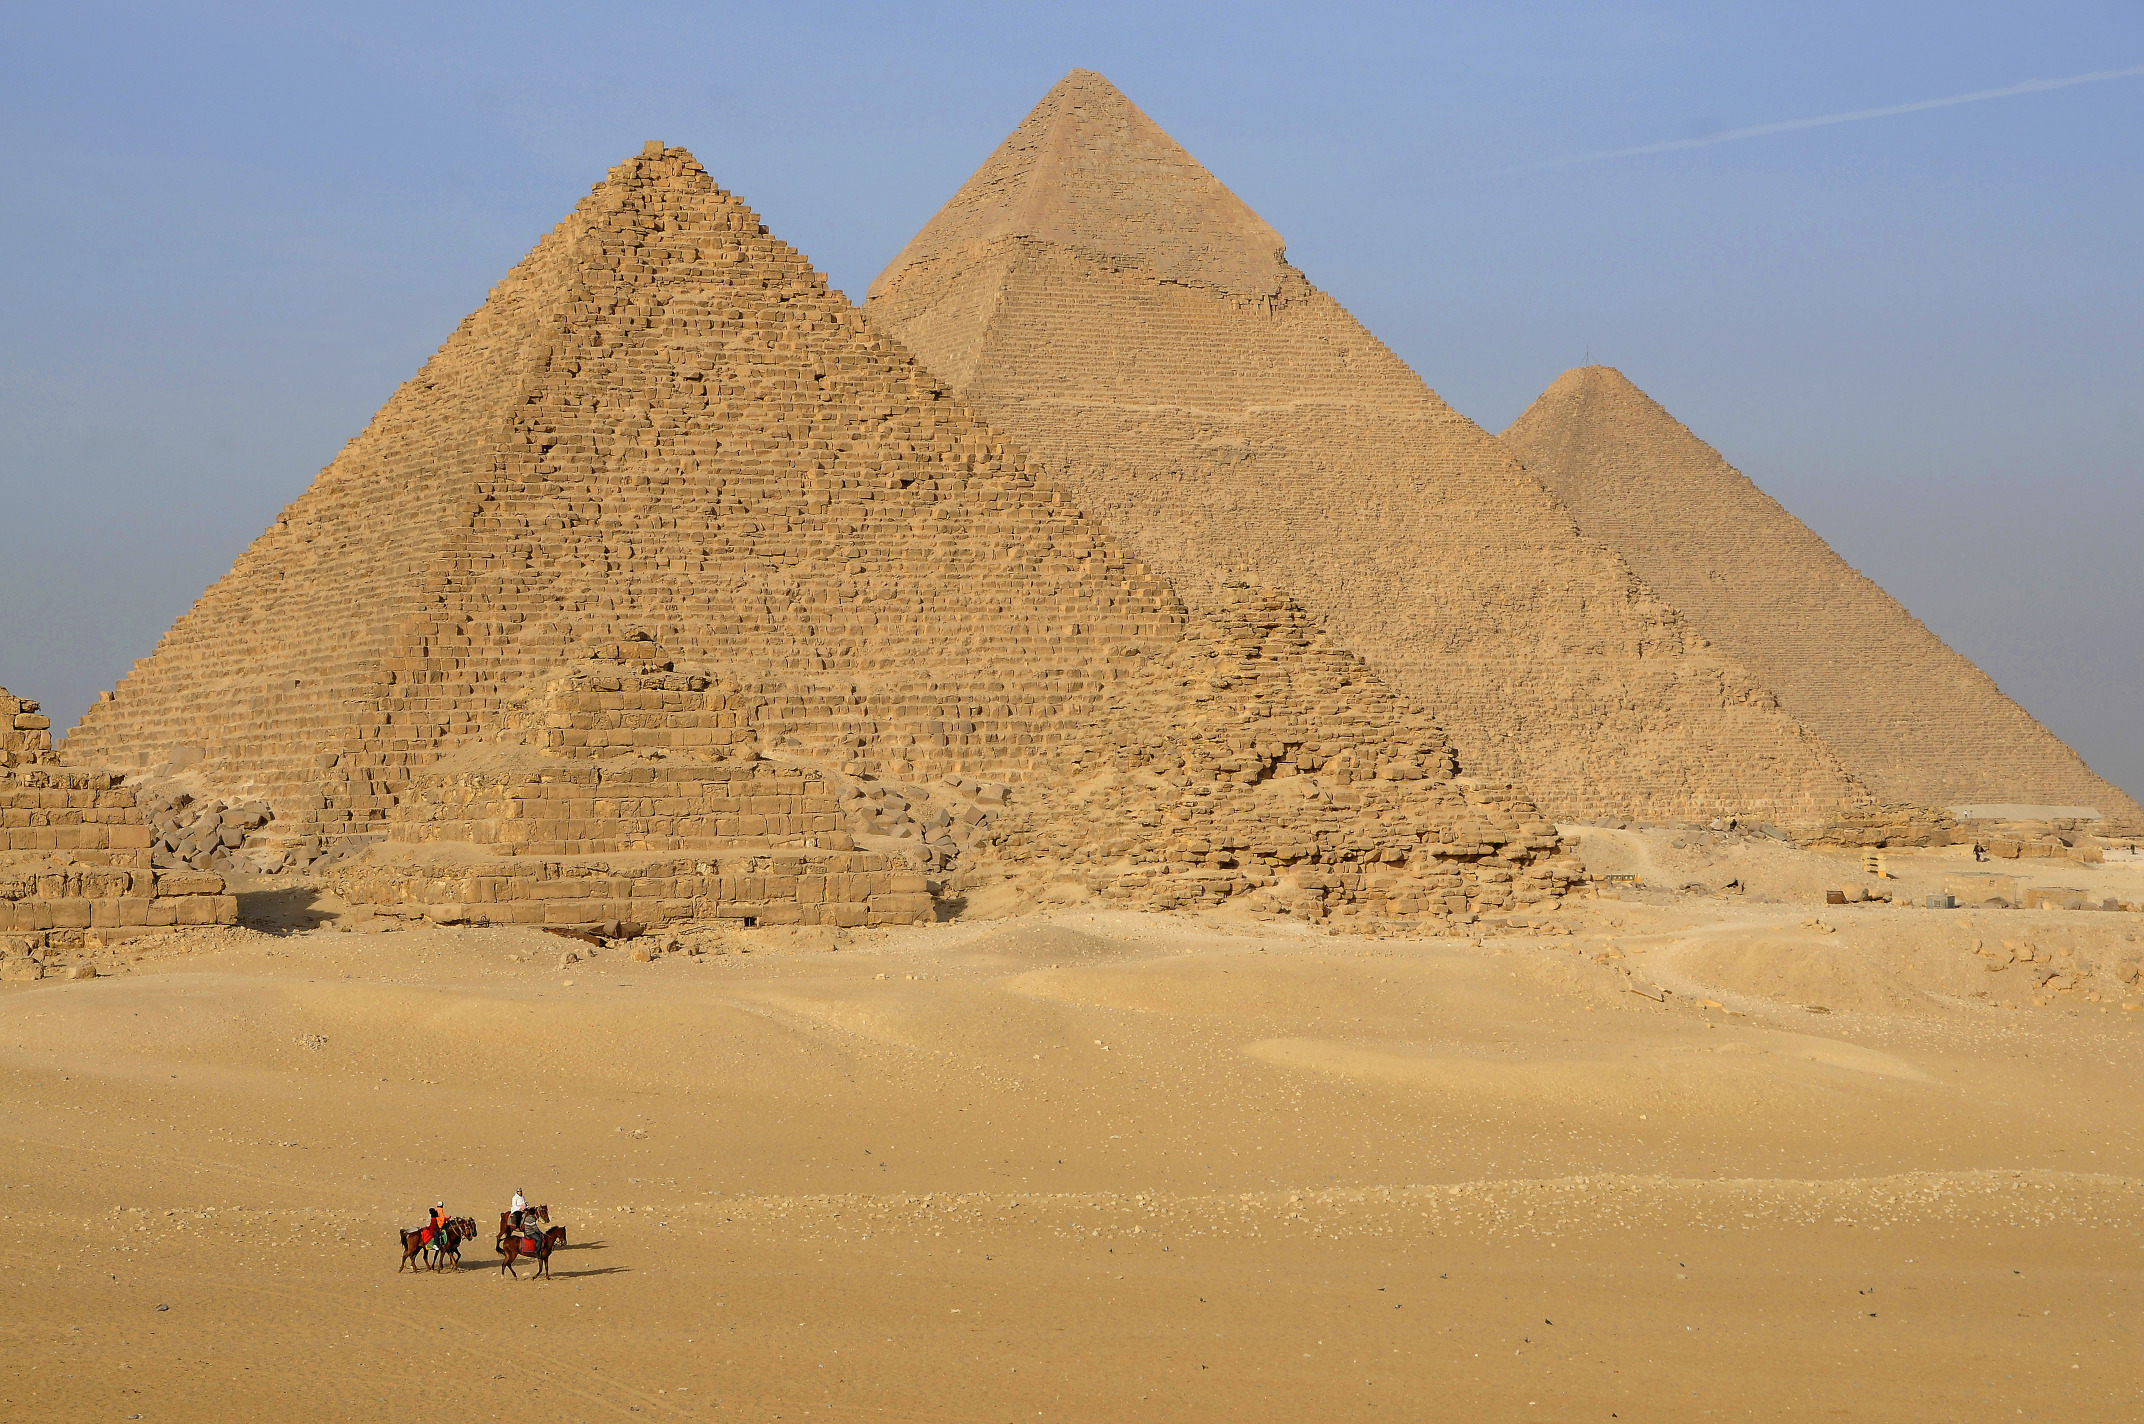 Pyramids of Giza | Gizeh Luxor | Pictures | Egypt in Global-Geography